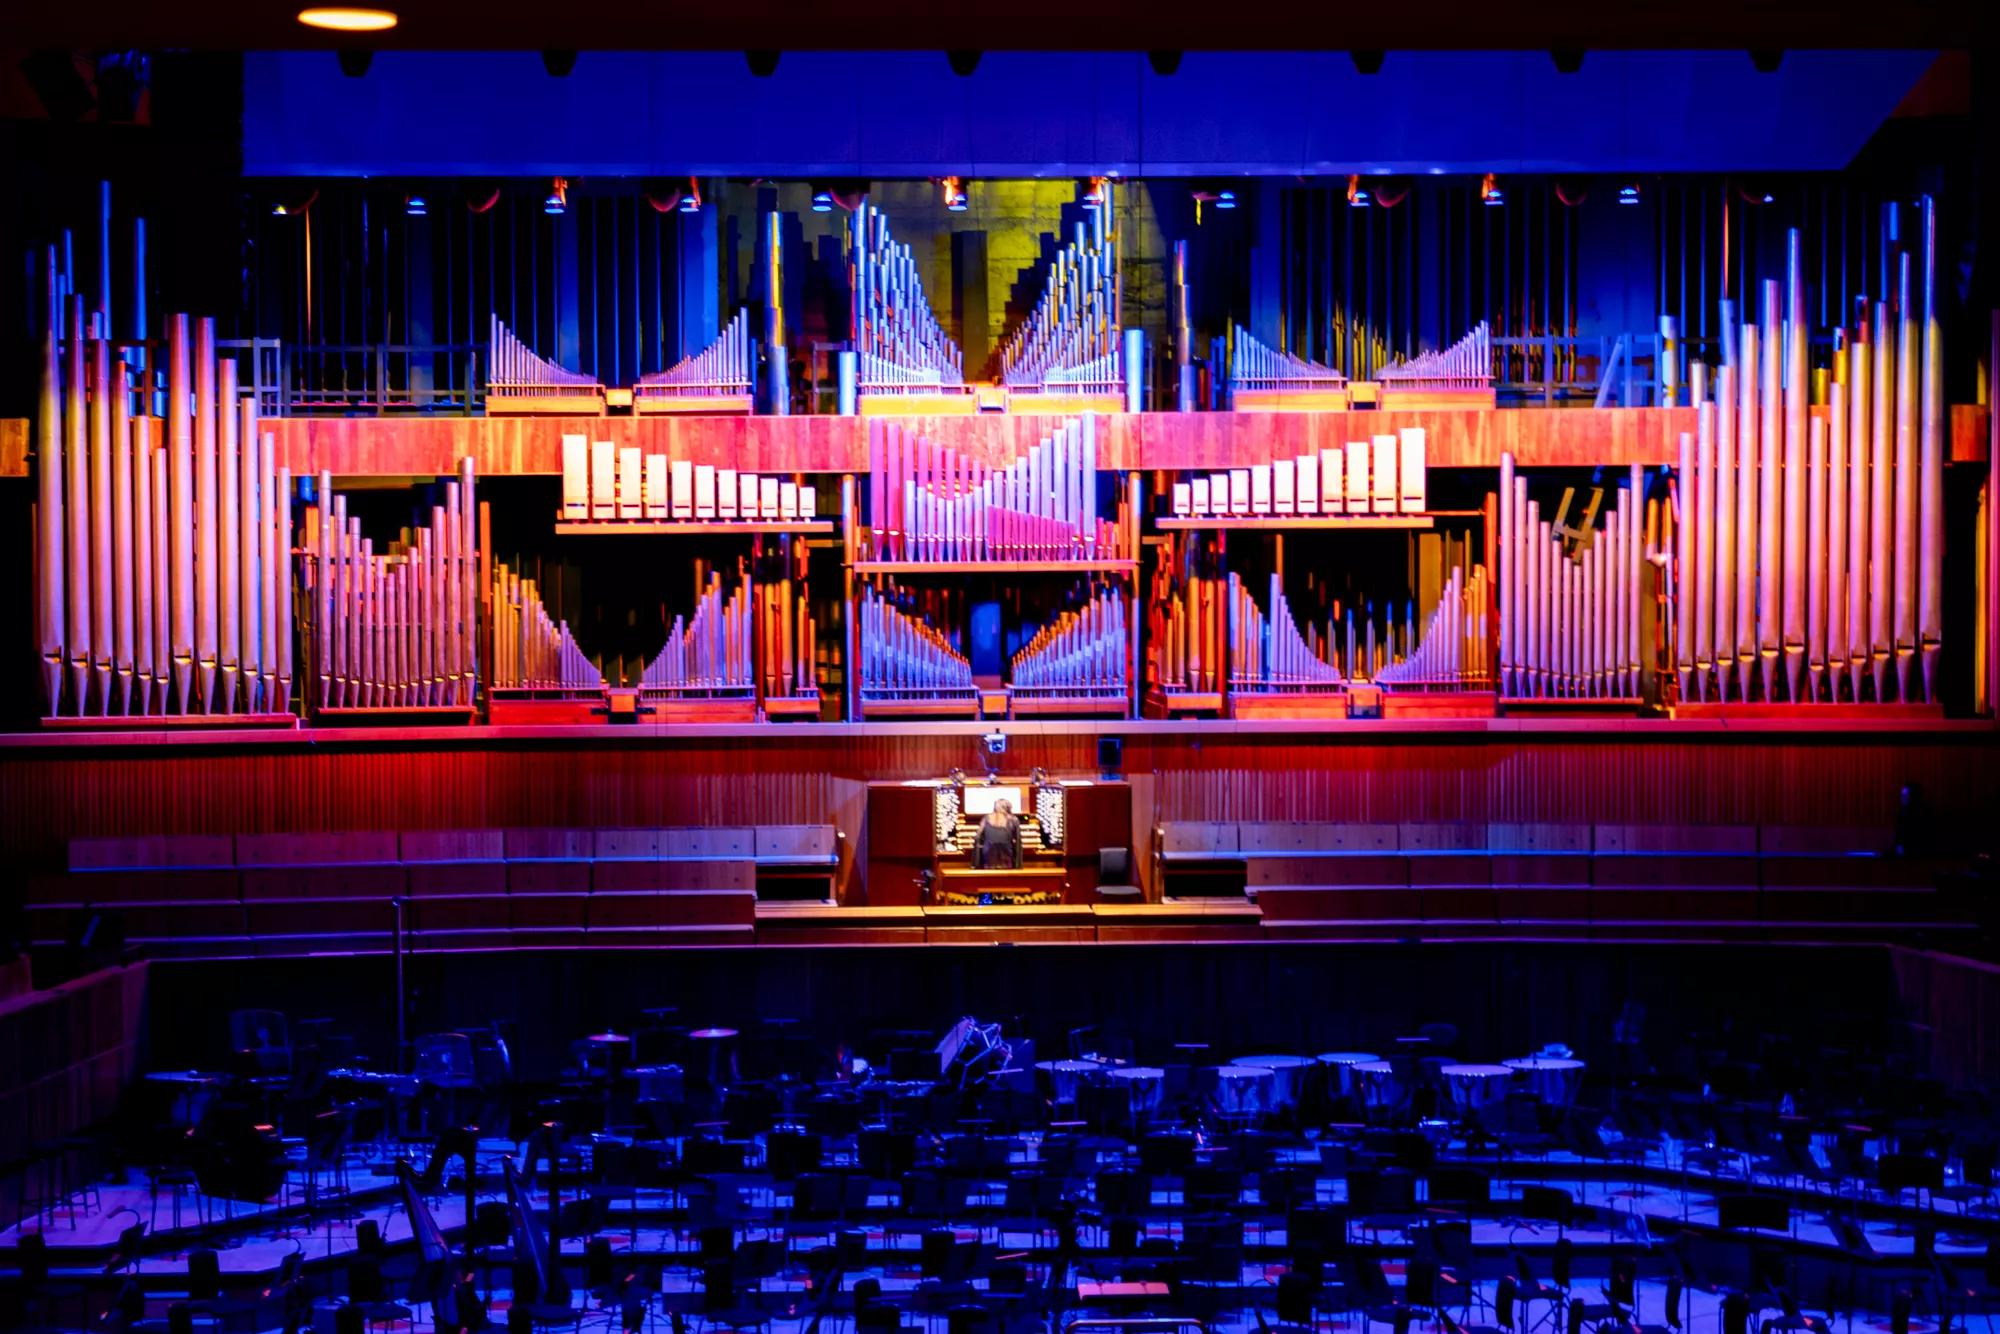 Organist Carol Williams plays the Royal Festival Hall organ whiich is illumiated with bold colours